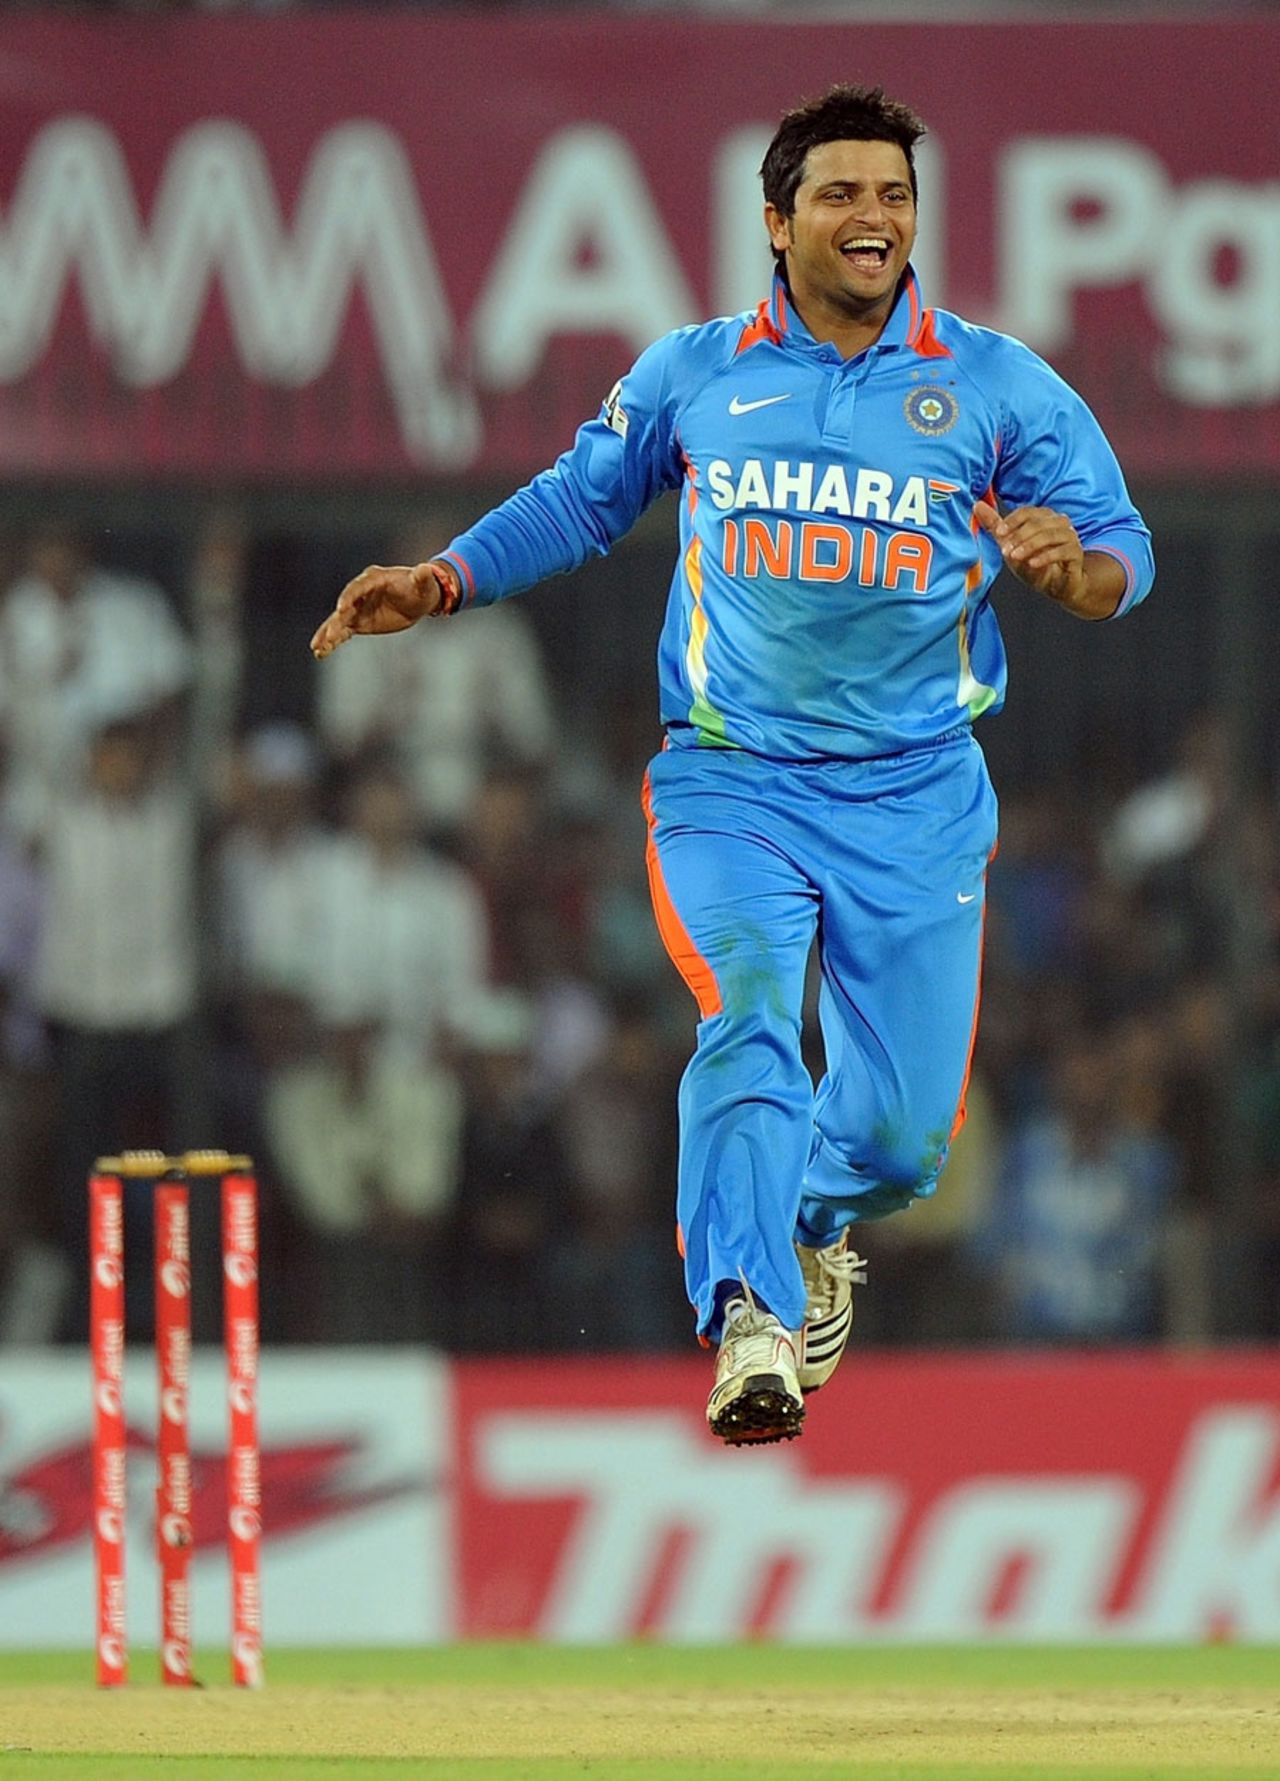 Suresh Raina celebrates Andre Russell's dismissal, India v West Indies, 4th ODI, Indore, December 8, 2011